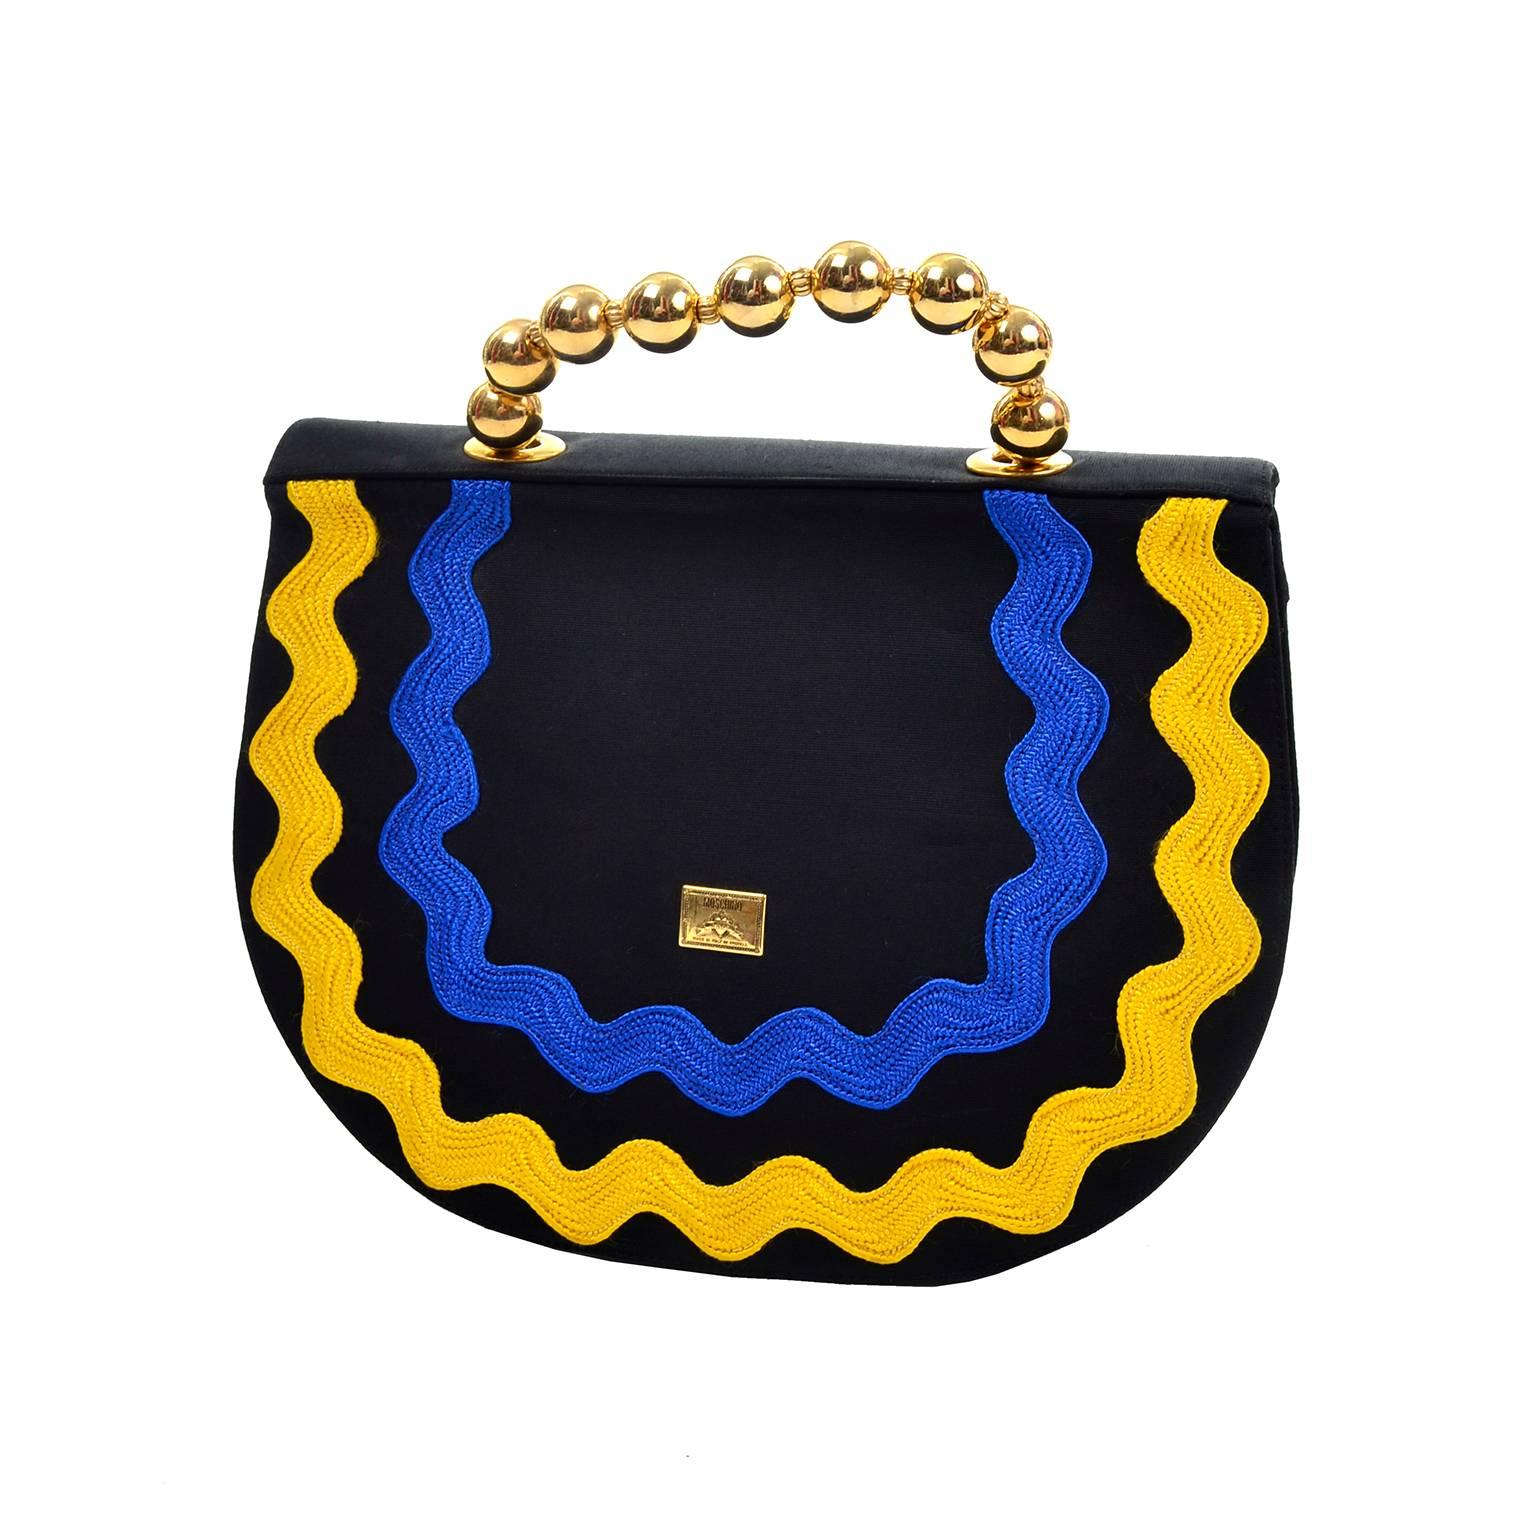 This is a really fun black fabric handbag by Moschino with wavy arching lines of rick rack following the curve of the bag in green, magenta, yellow and blue. These rope-like ribbons are thick, creating a relief on the bag. The handle is made of